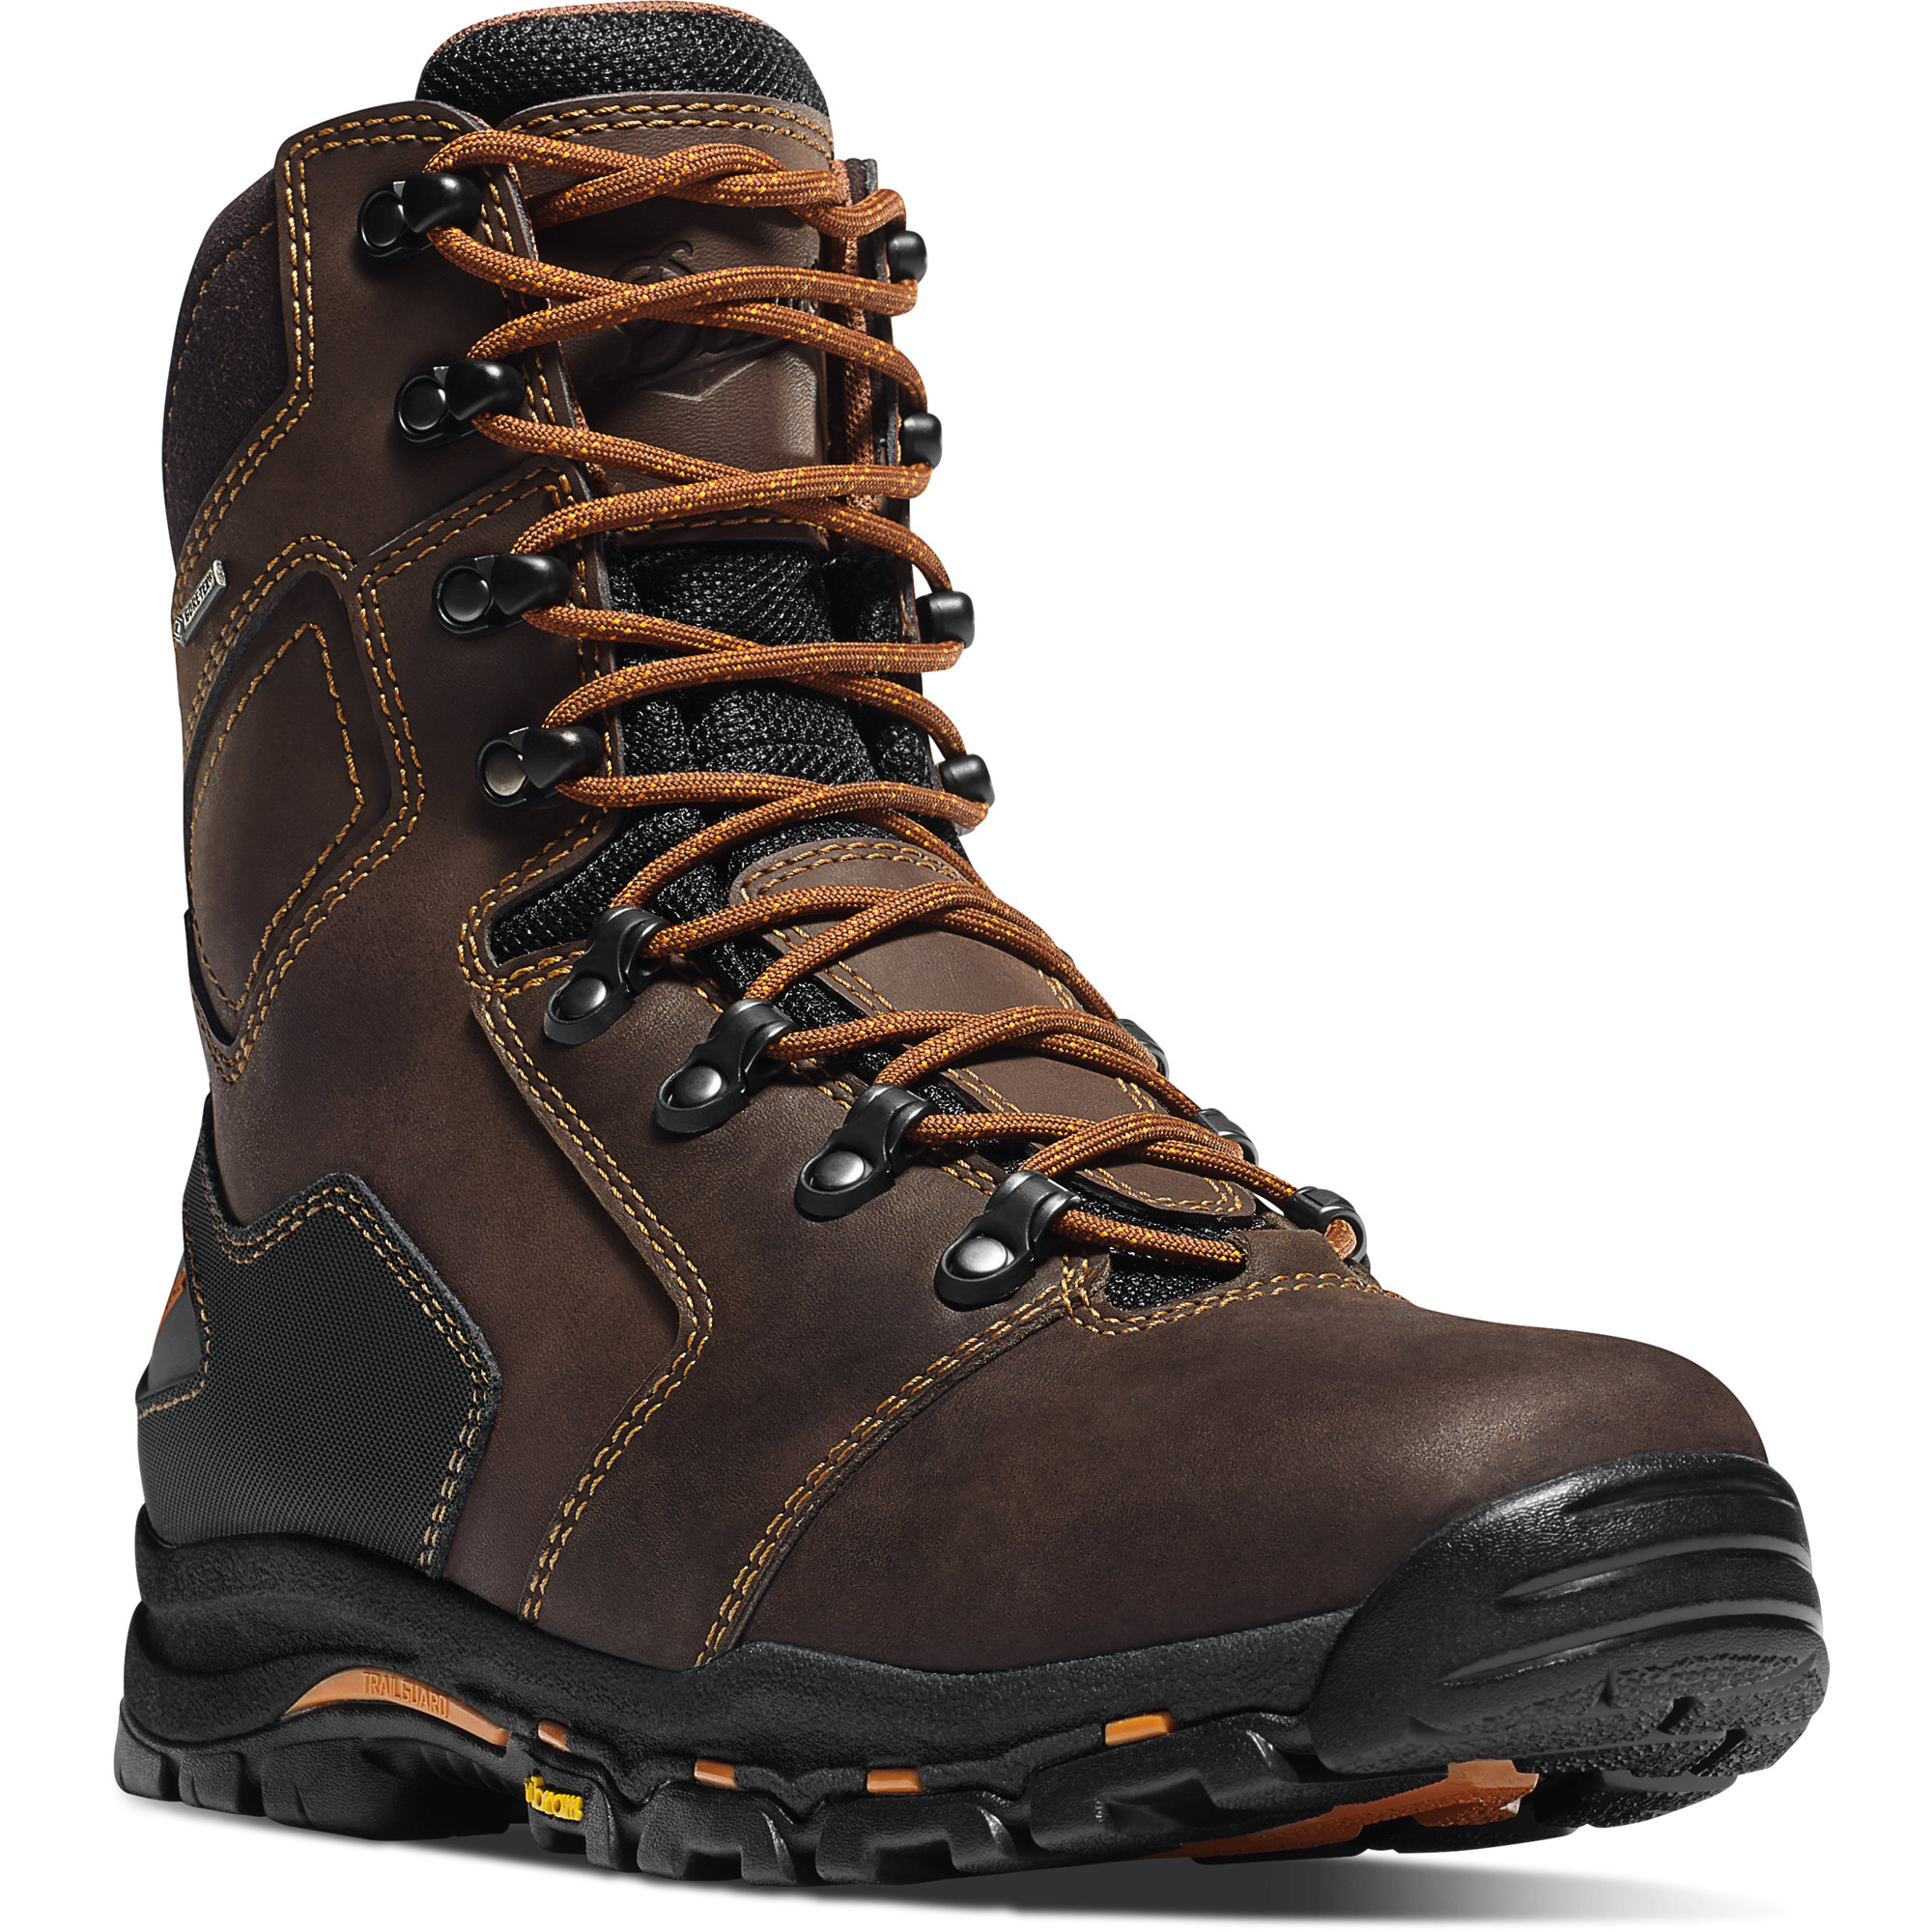 LaCrosse Men's Vicious 8 Inch Work Boots with Composite Toe (Brown)LaCrosse Men's Vicious 8 Inch Work Boots with Composite Toe (Brown) from Columbia Safety